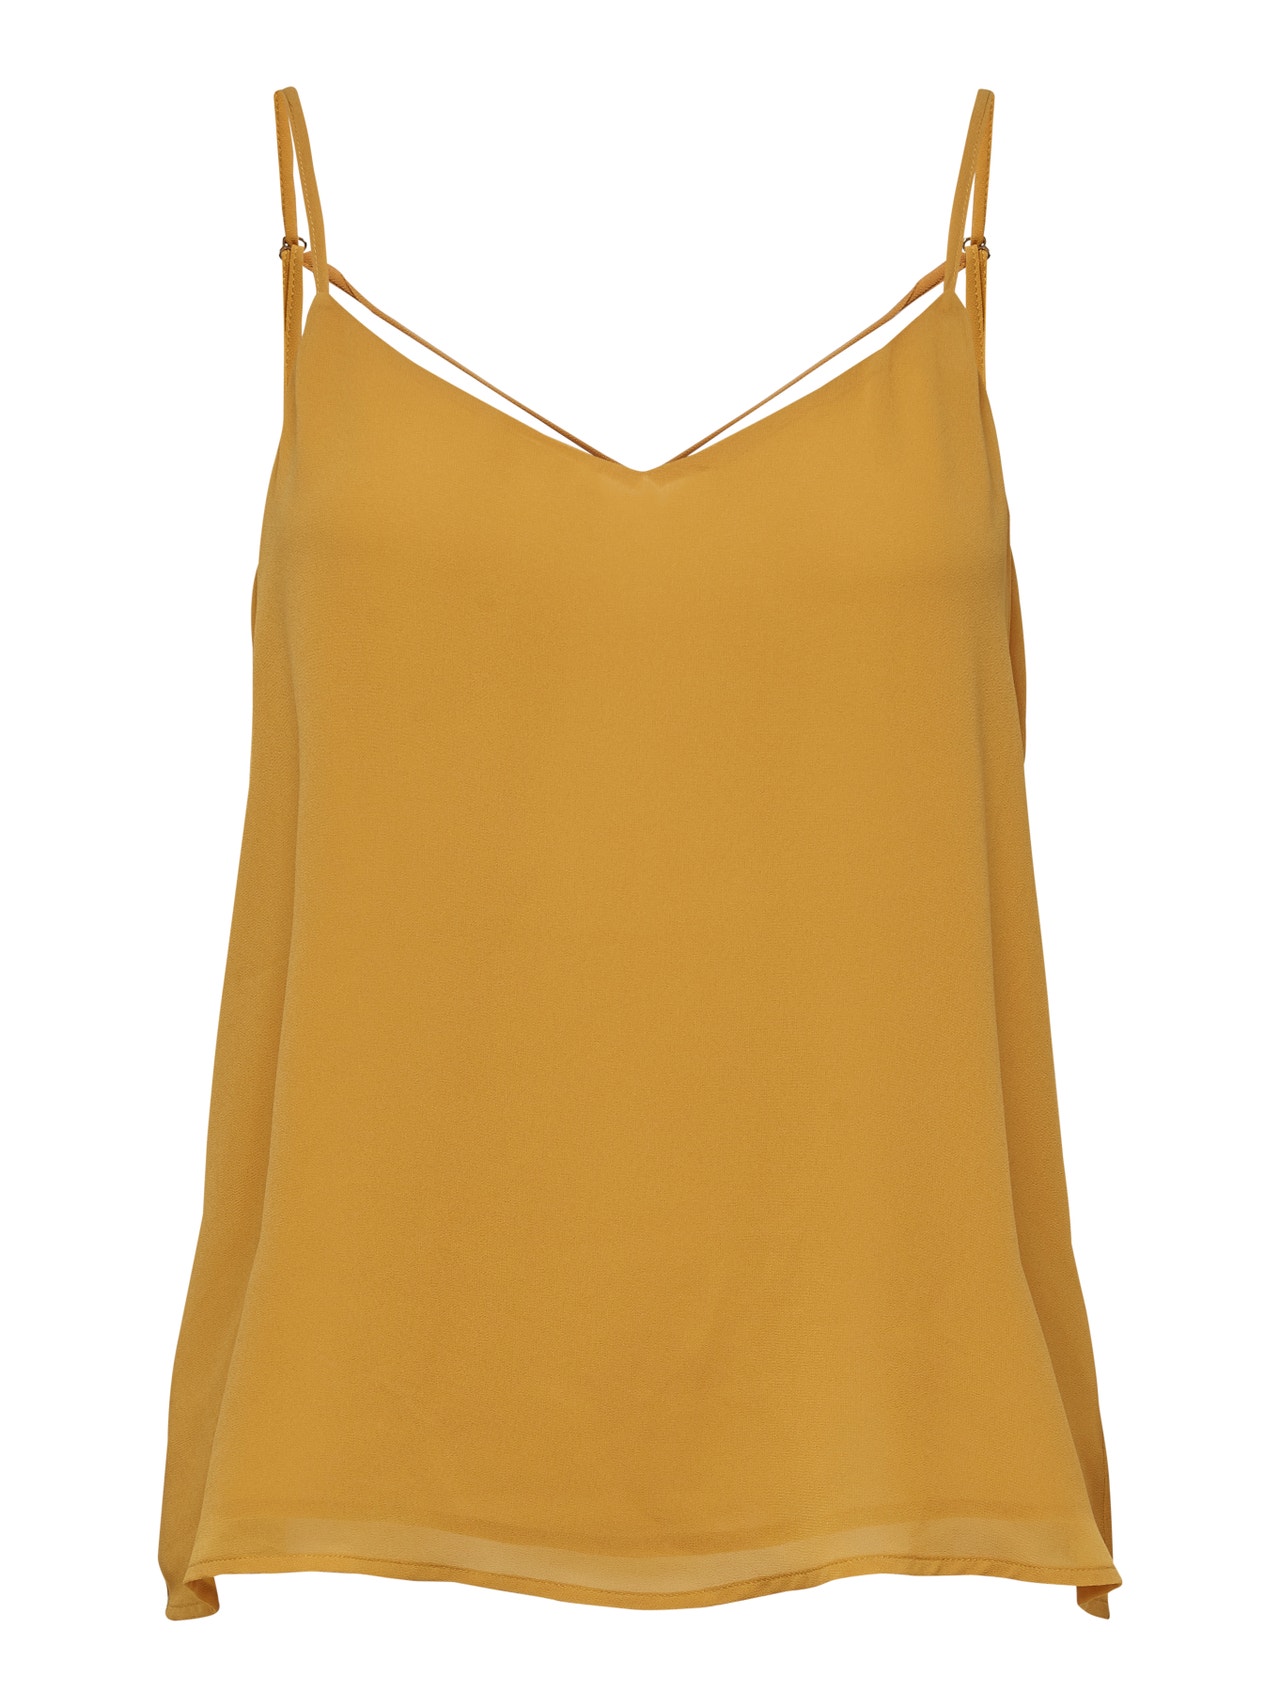 ONLY Loose Singlet Top -Mango Mojito - 15177444